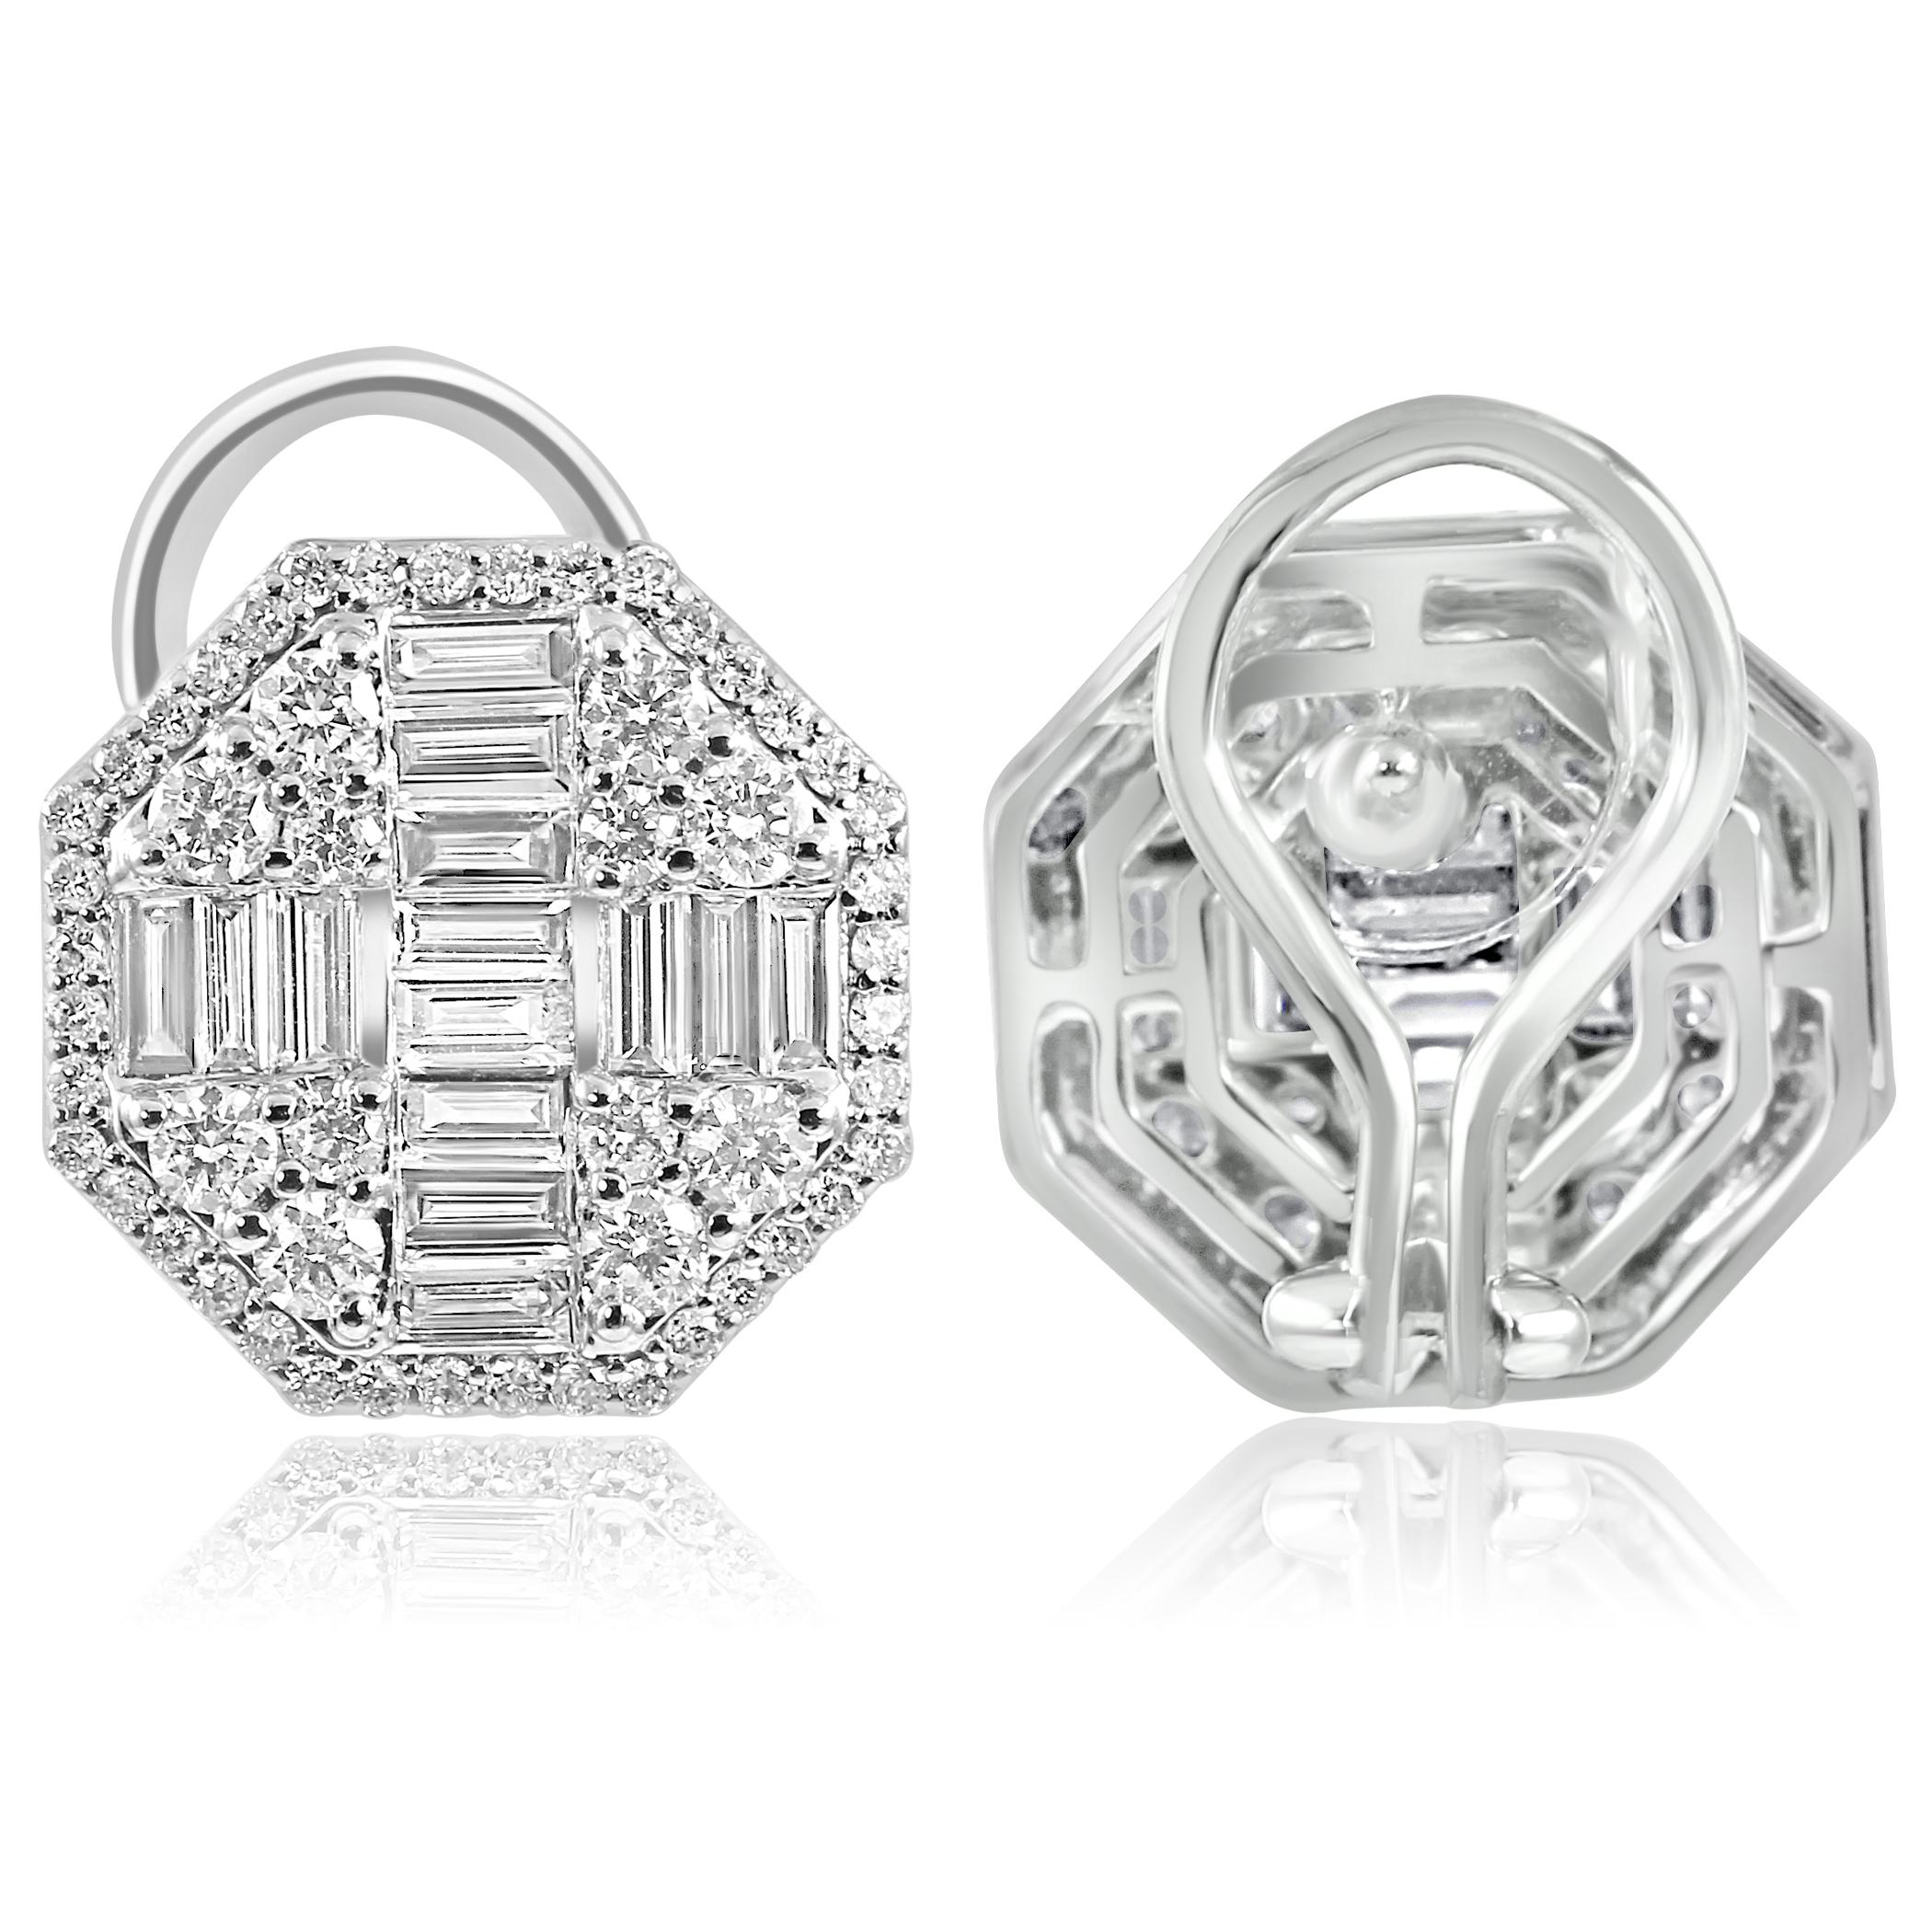 This exceptional pair of earrings effortlessly combines classic allure with modern design, making a bold statement of refined opulence.

At the heart of each earring, are dazzling baguette-cut diamonds totaling 1.14 carats. Renowned for their sleek